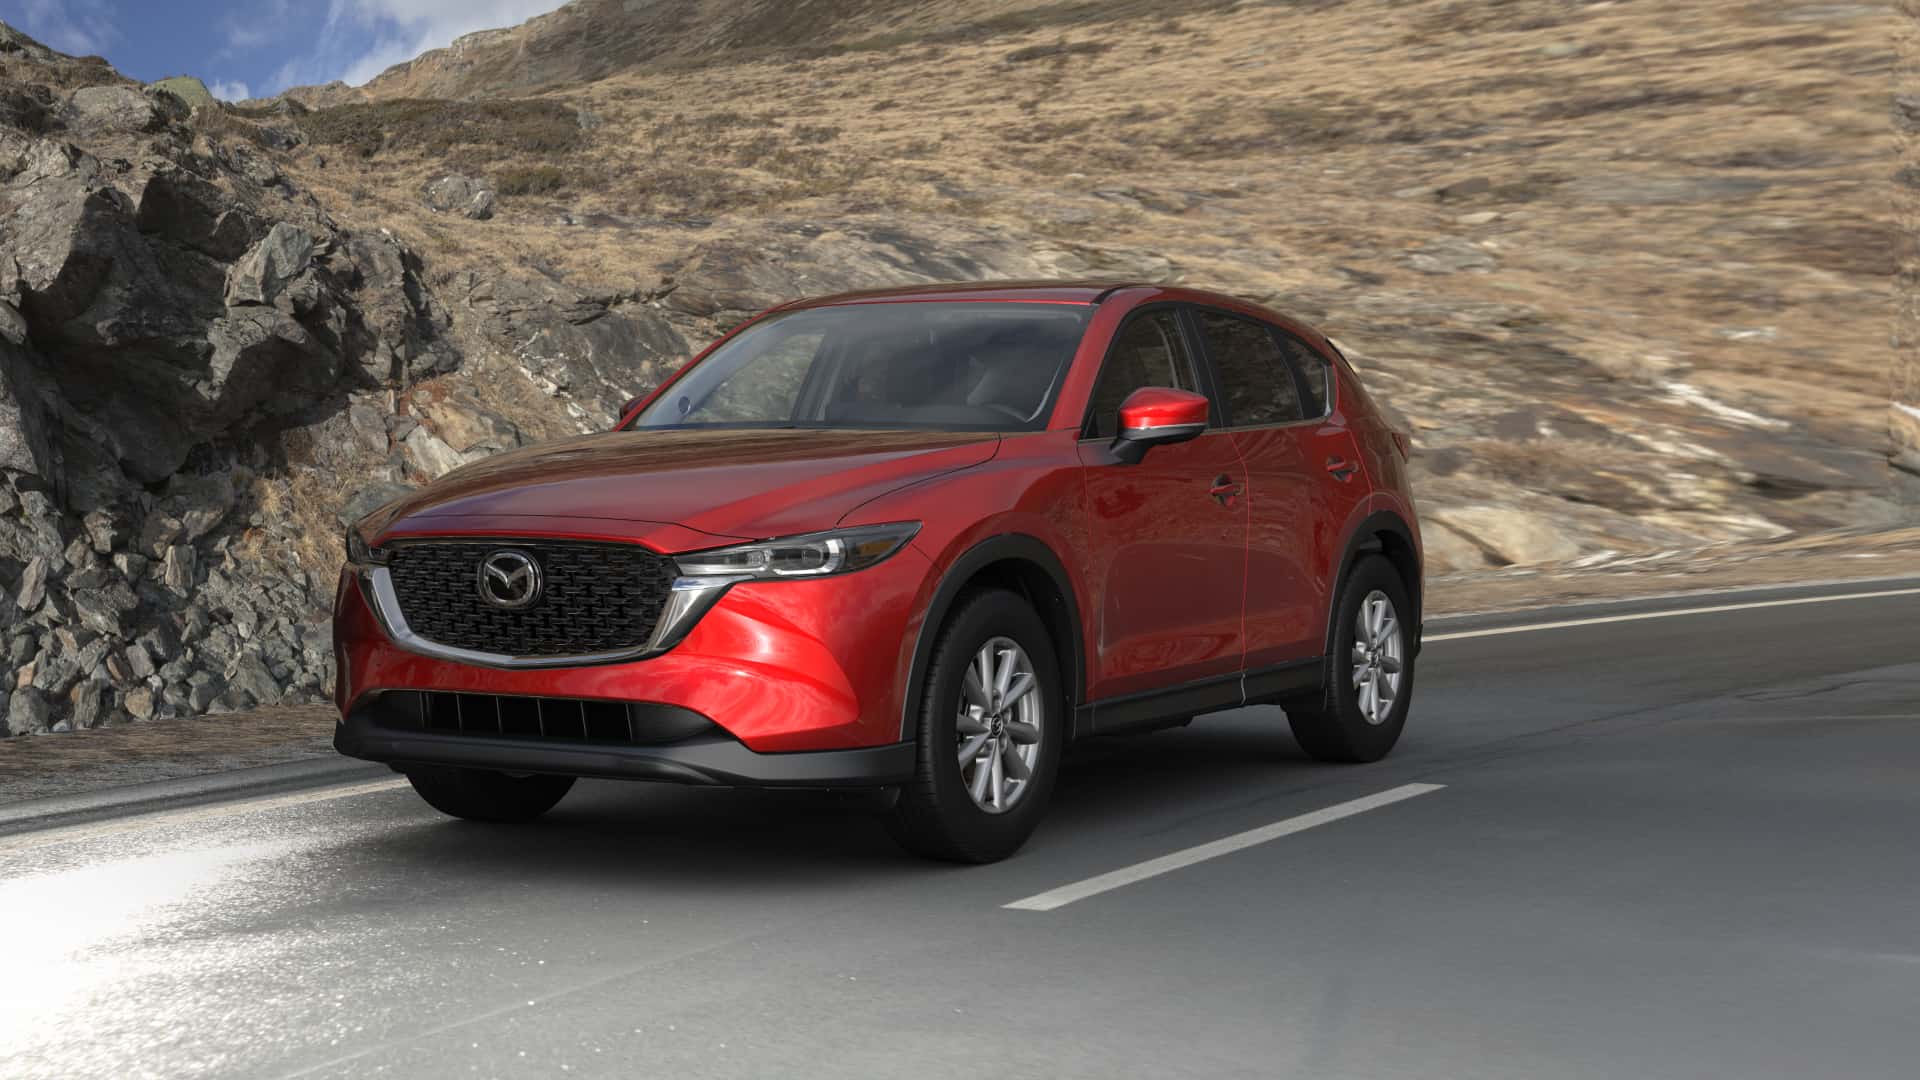 2023 Mazda CX-5 2.5 S Preferred Soul Red Crystal Metallic | Bommarito Mazda St. Peters in St. Peters MO